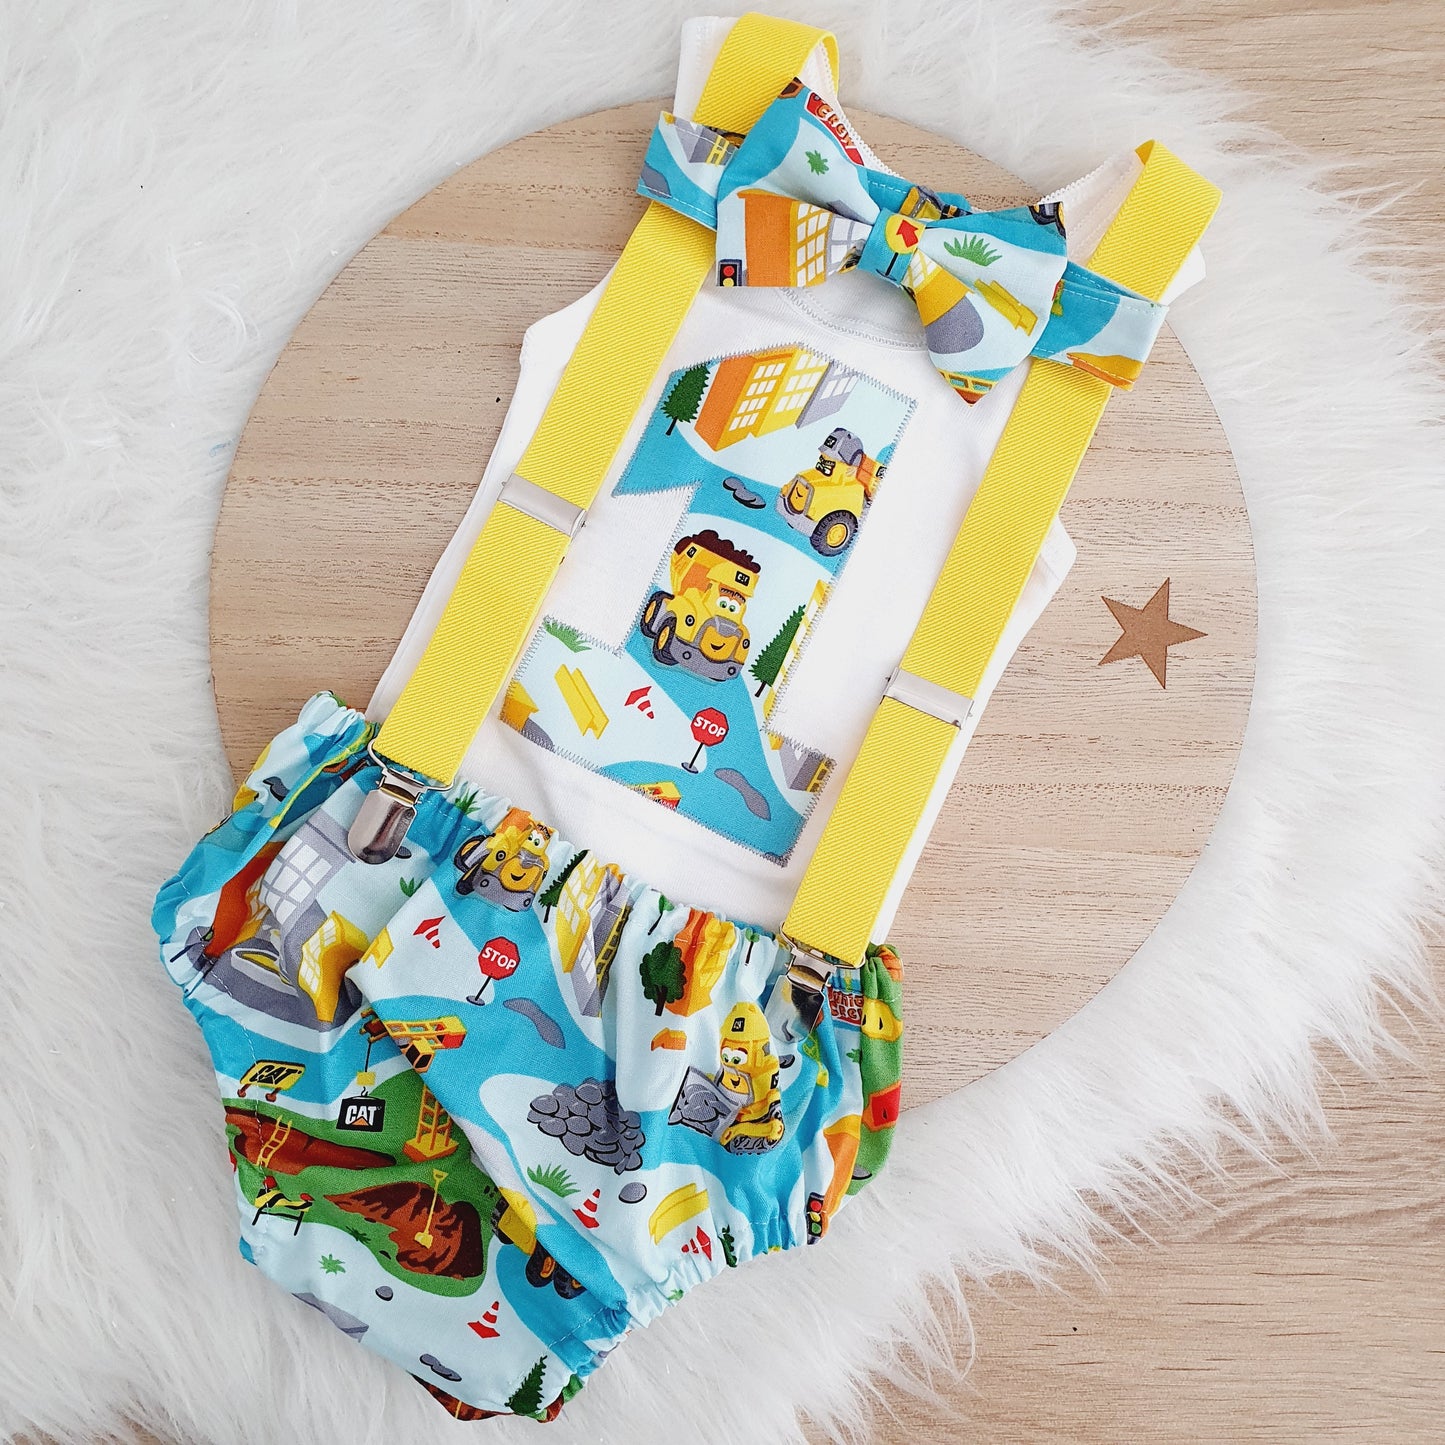 CAT CONSTRUCTION print Boys 1st Birthday - Cake Smash Outfit - Size 0, Nappy Cover, Tie, Suspenders & Singlet Set